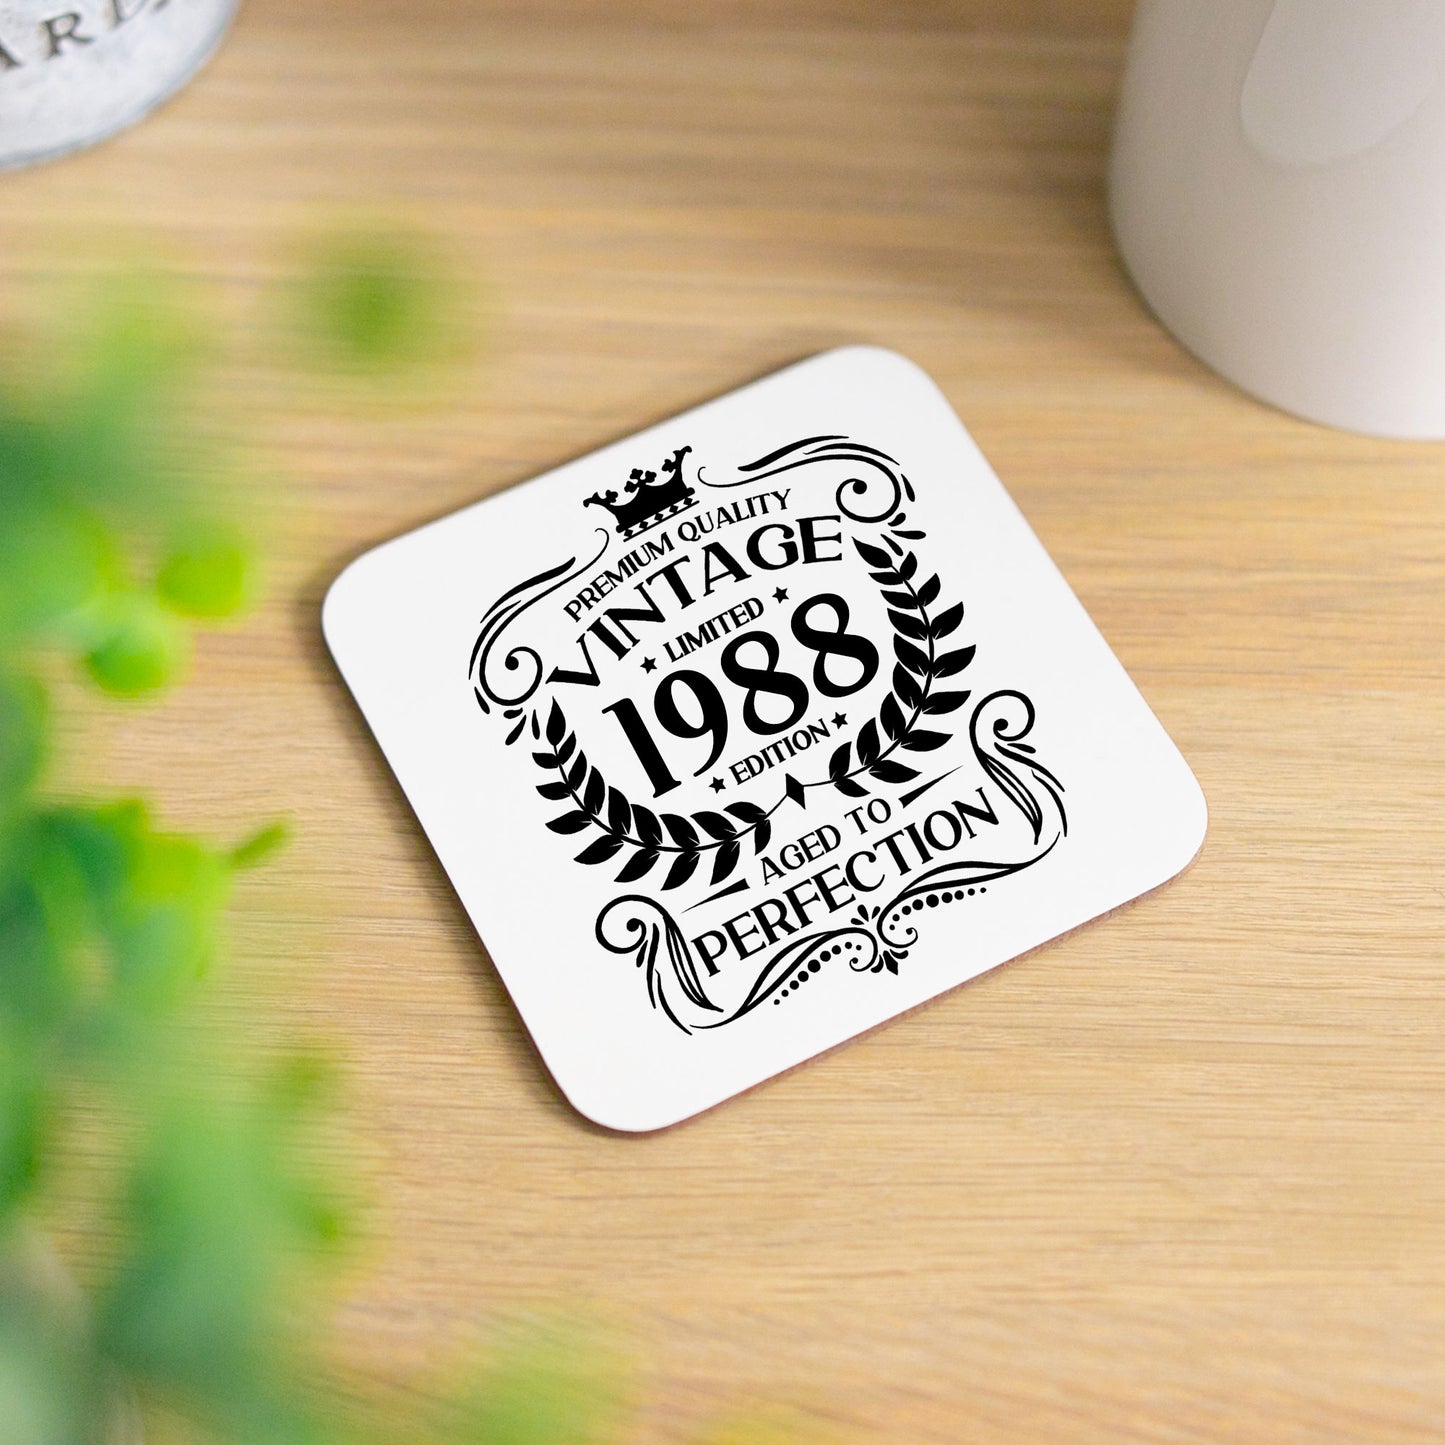 Vintage 1988 35th Birthday Engraved Wine Glass Gift  - Always Looking Good - Glass & Printed Coaster  